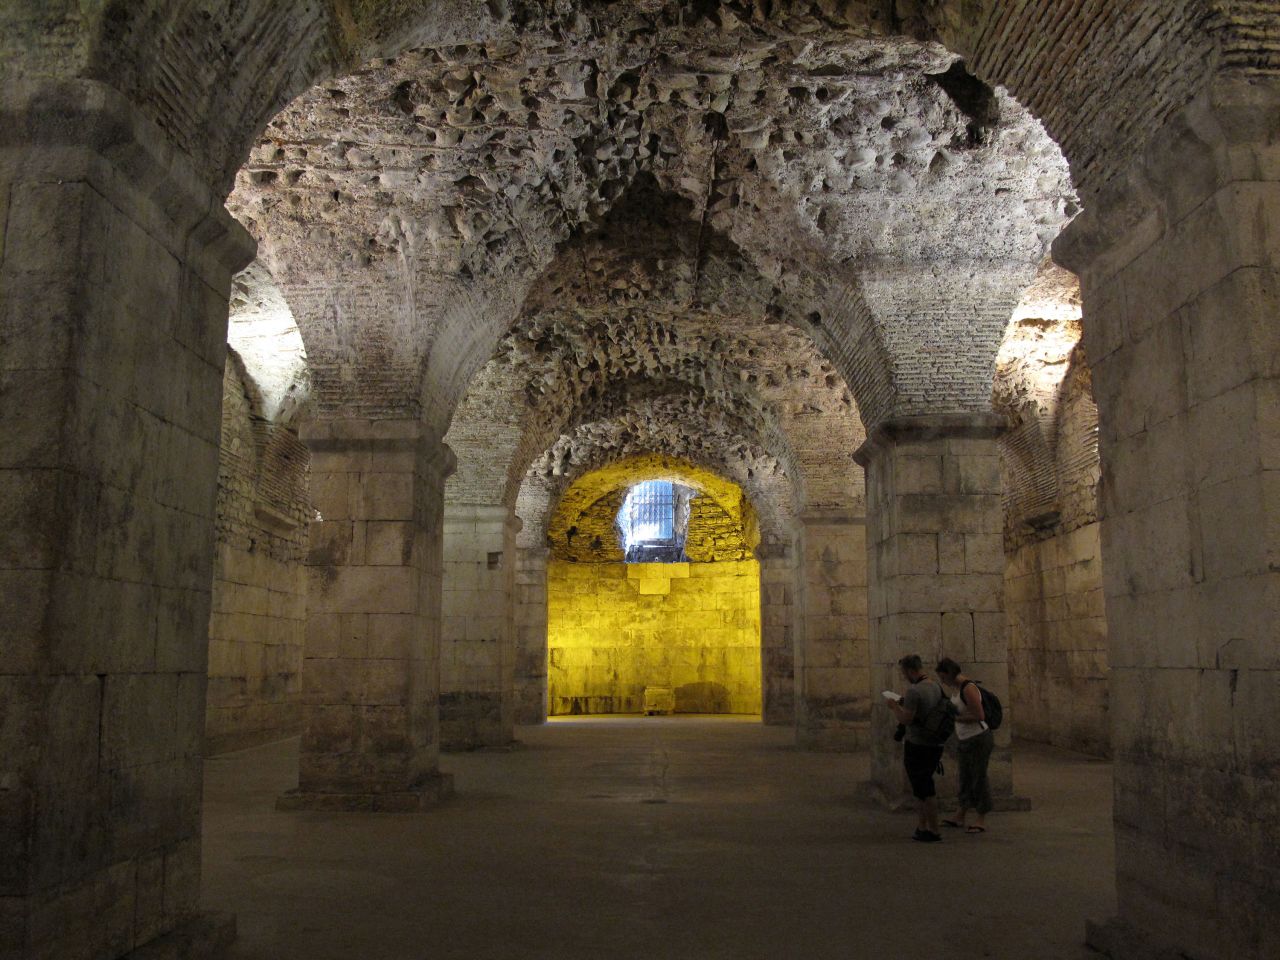 Underground areas, such as the vaulted cellars of the Palace of the Roman Emperor Diocletian in Split, Croatia, would be hard hit by the rising sea levels caused by climate change.